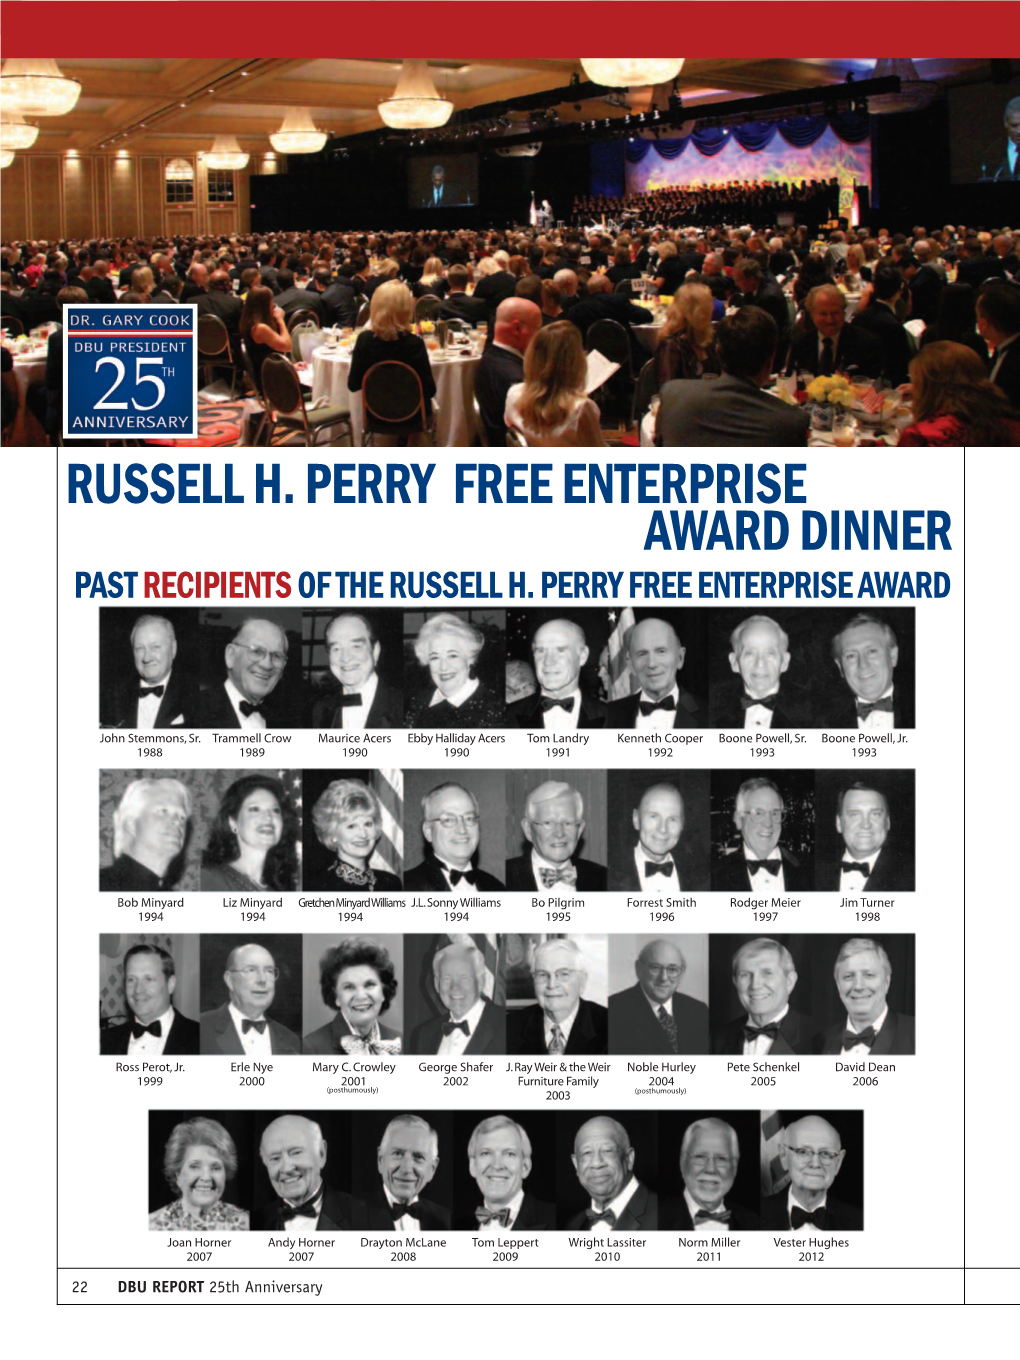 Russell H. Perry Free Enterprise Award Dinner Past Recipients of the Russell H